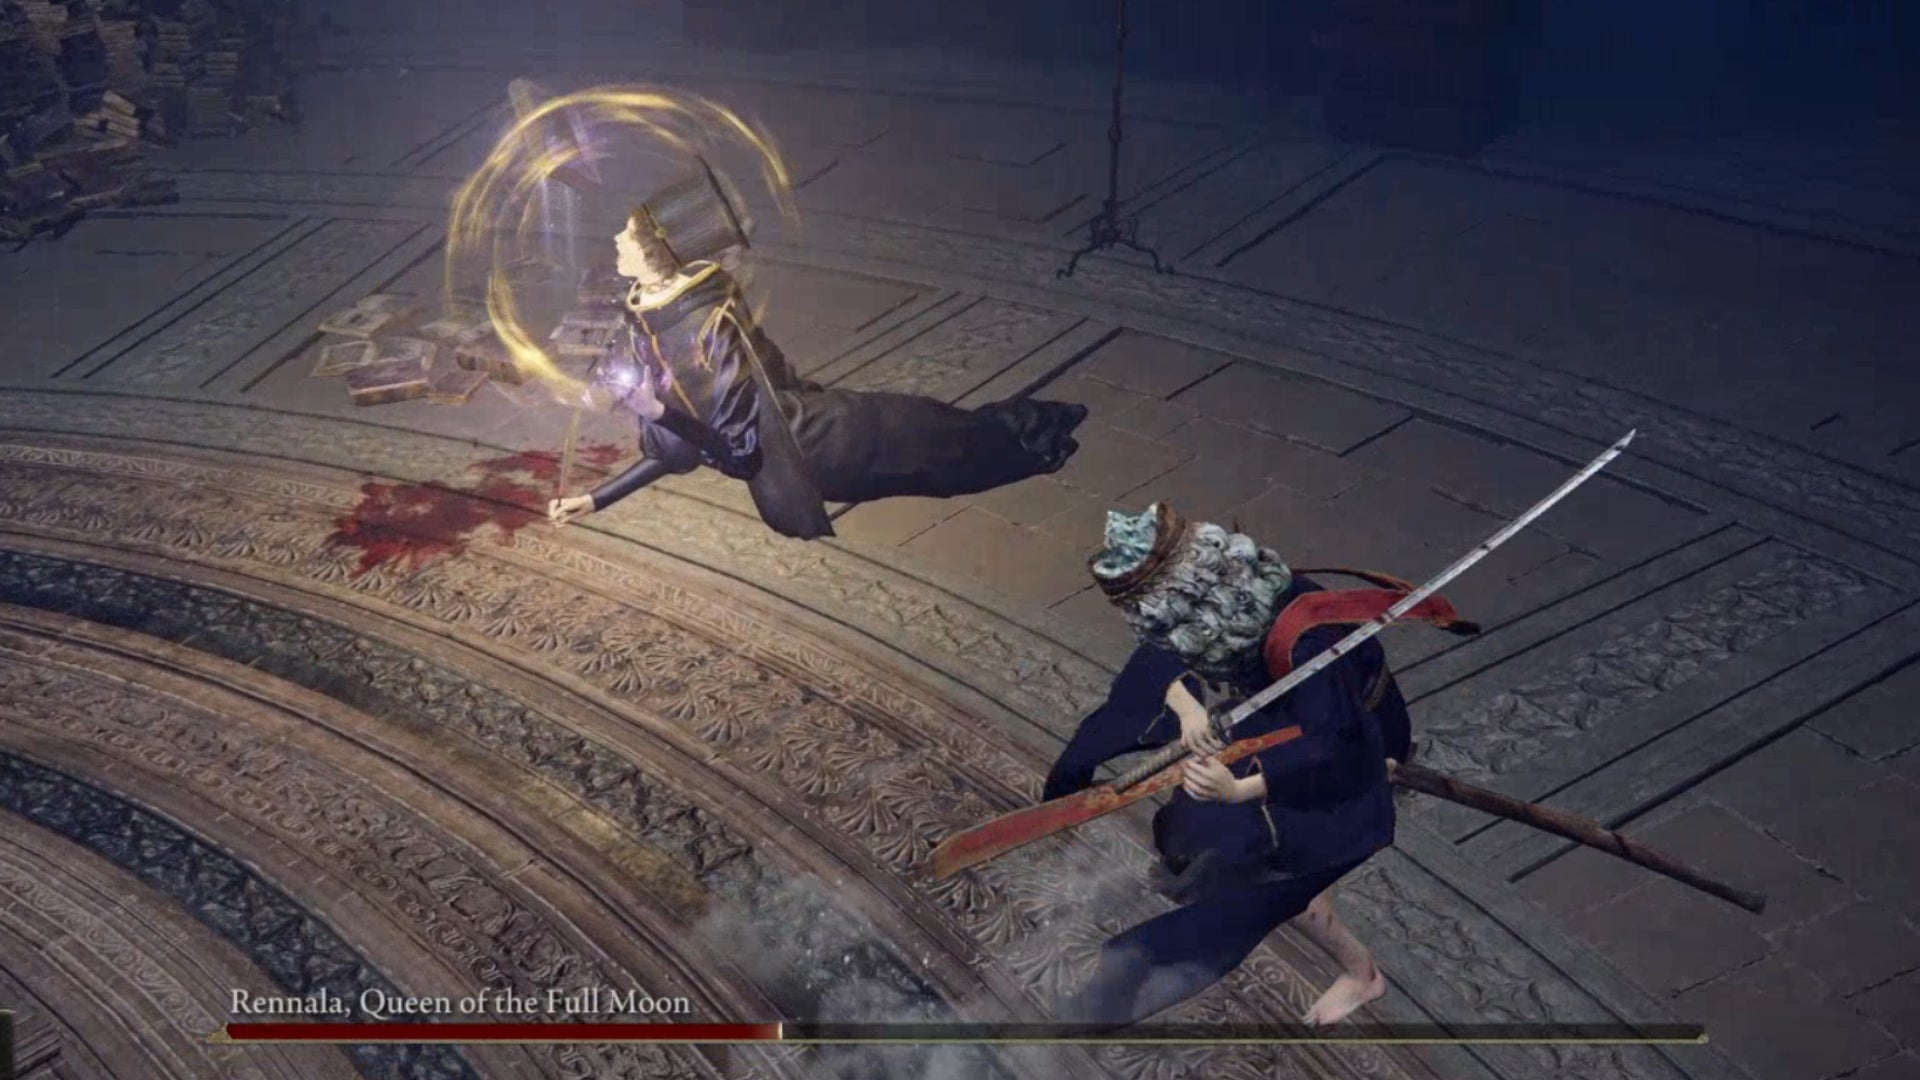 Elden Ring: the player slashes at one of Rennala's minions. The minion has a golden glow about her head.